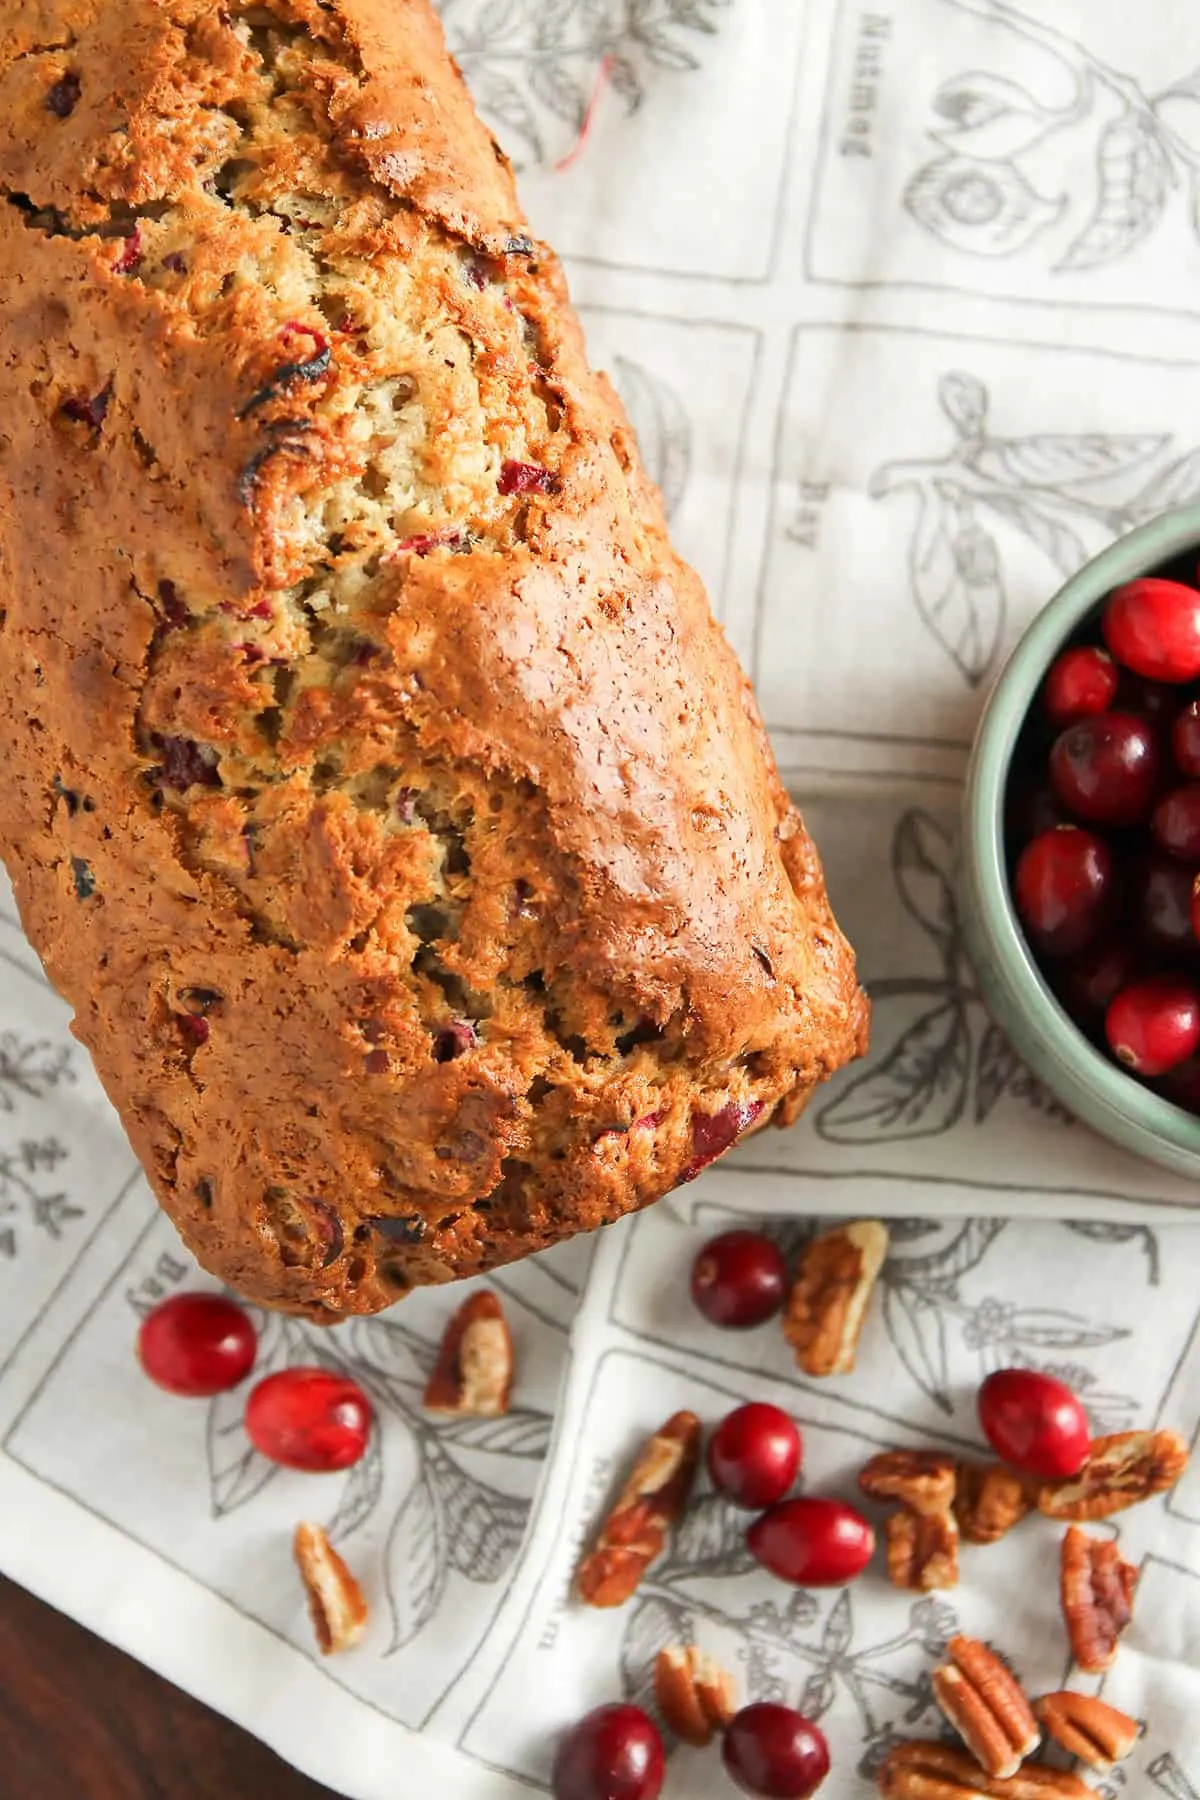 Cranberry Nut Bread is tart and sweet, and so easy you’ll want to make it again and again.